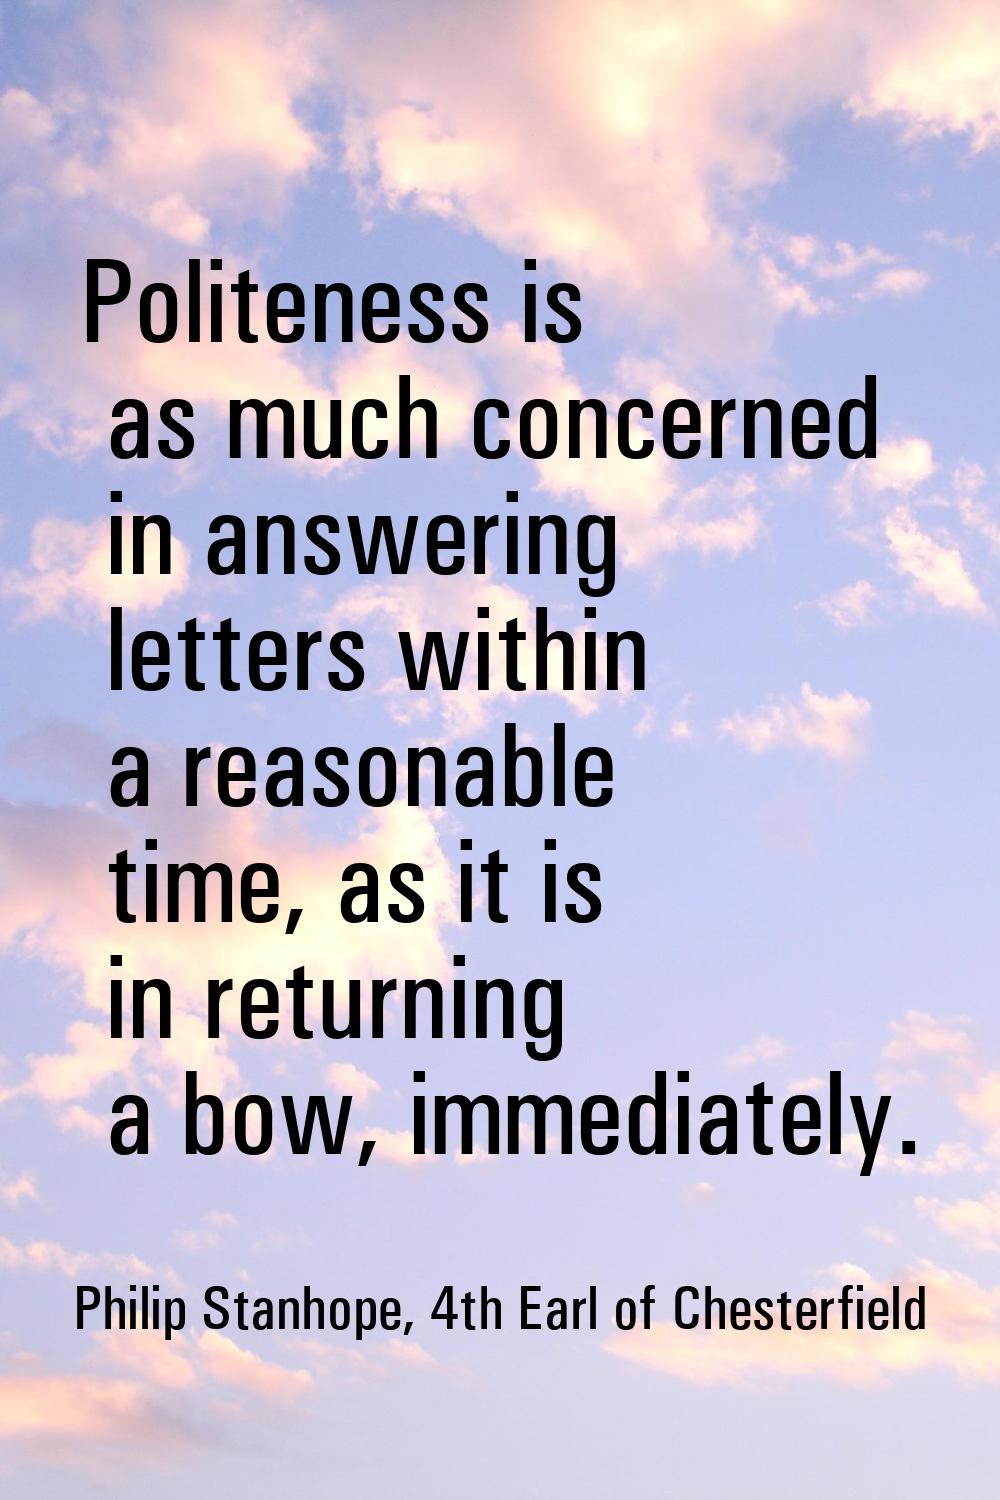 Politeness is as much concerned in answering letters within a reasonable time, as it is in returnin